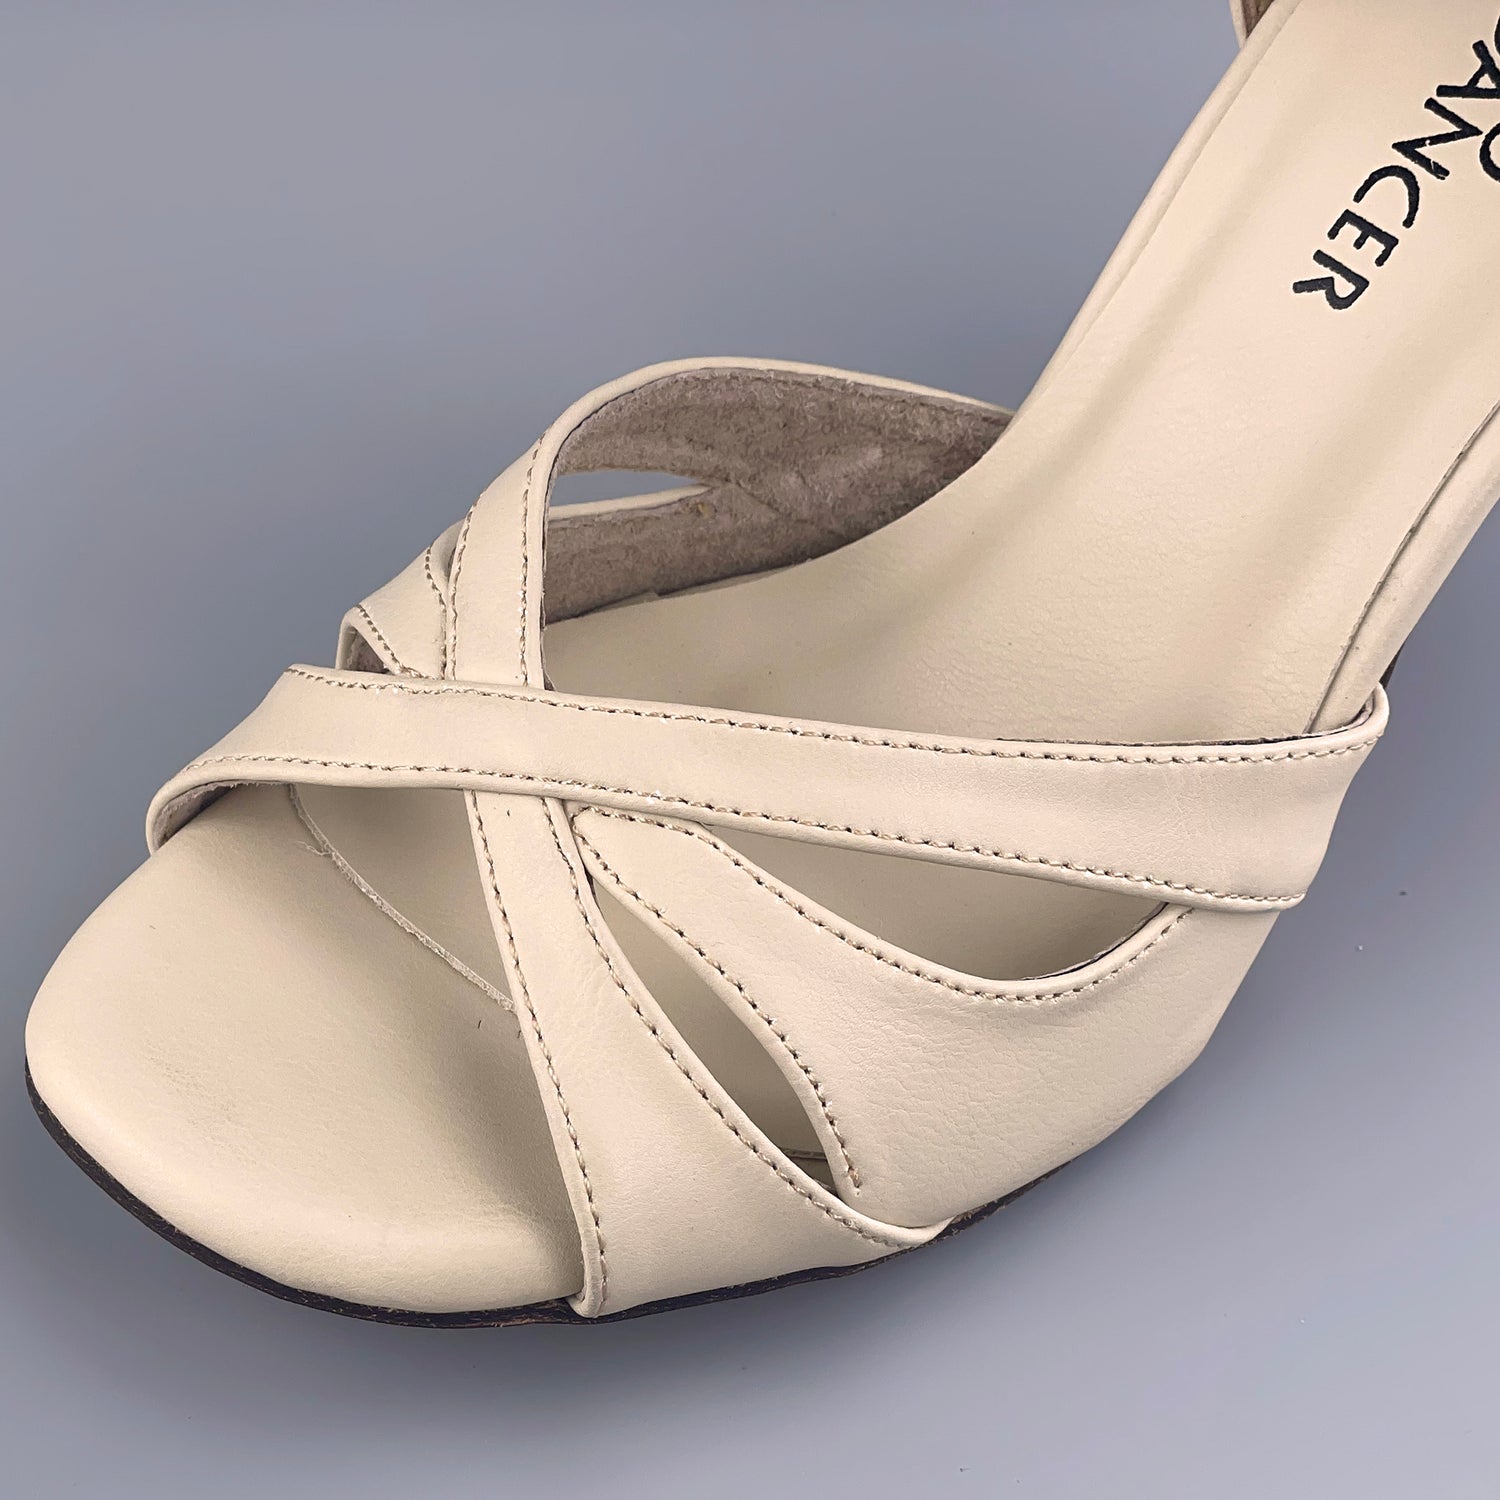 Pro Dancer Tango Argentino Shoes high heel dance sandals with leather sole in beige color (PD-9061A)7